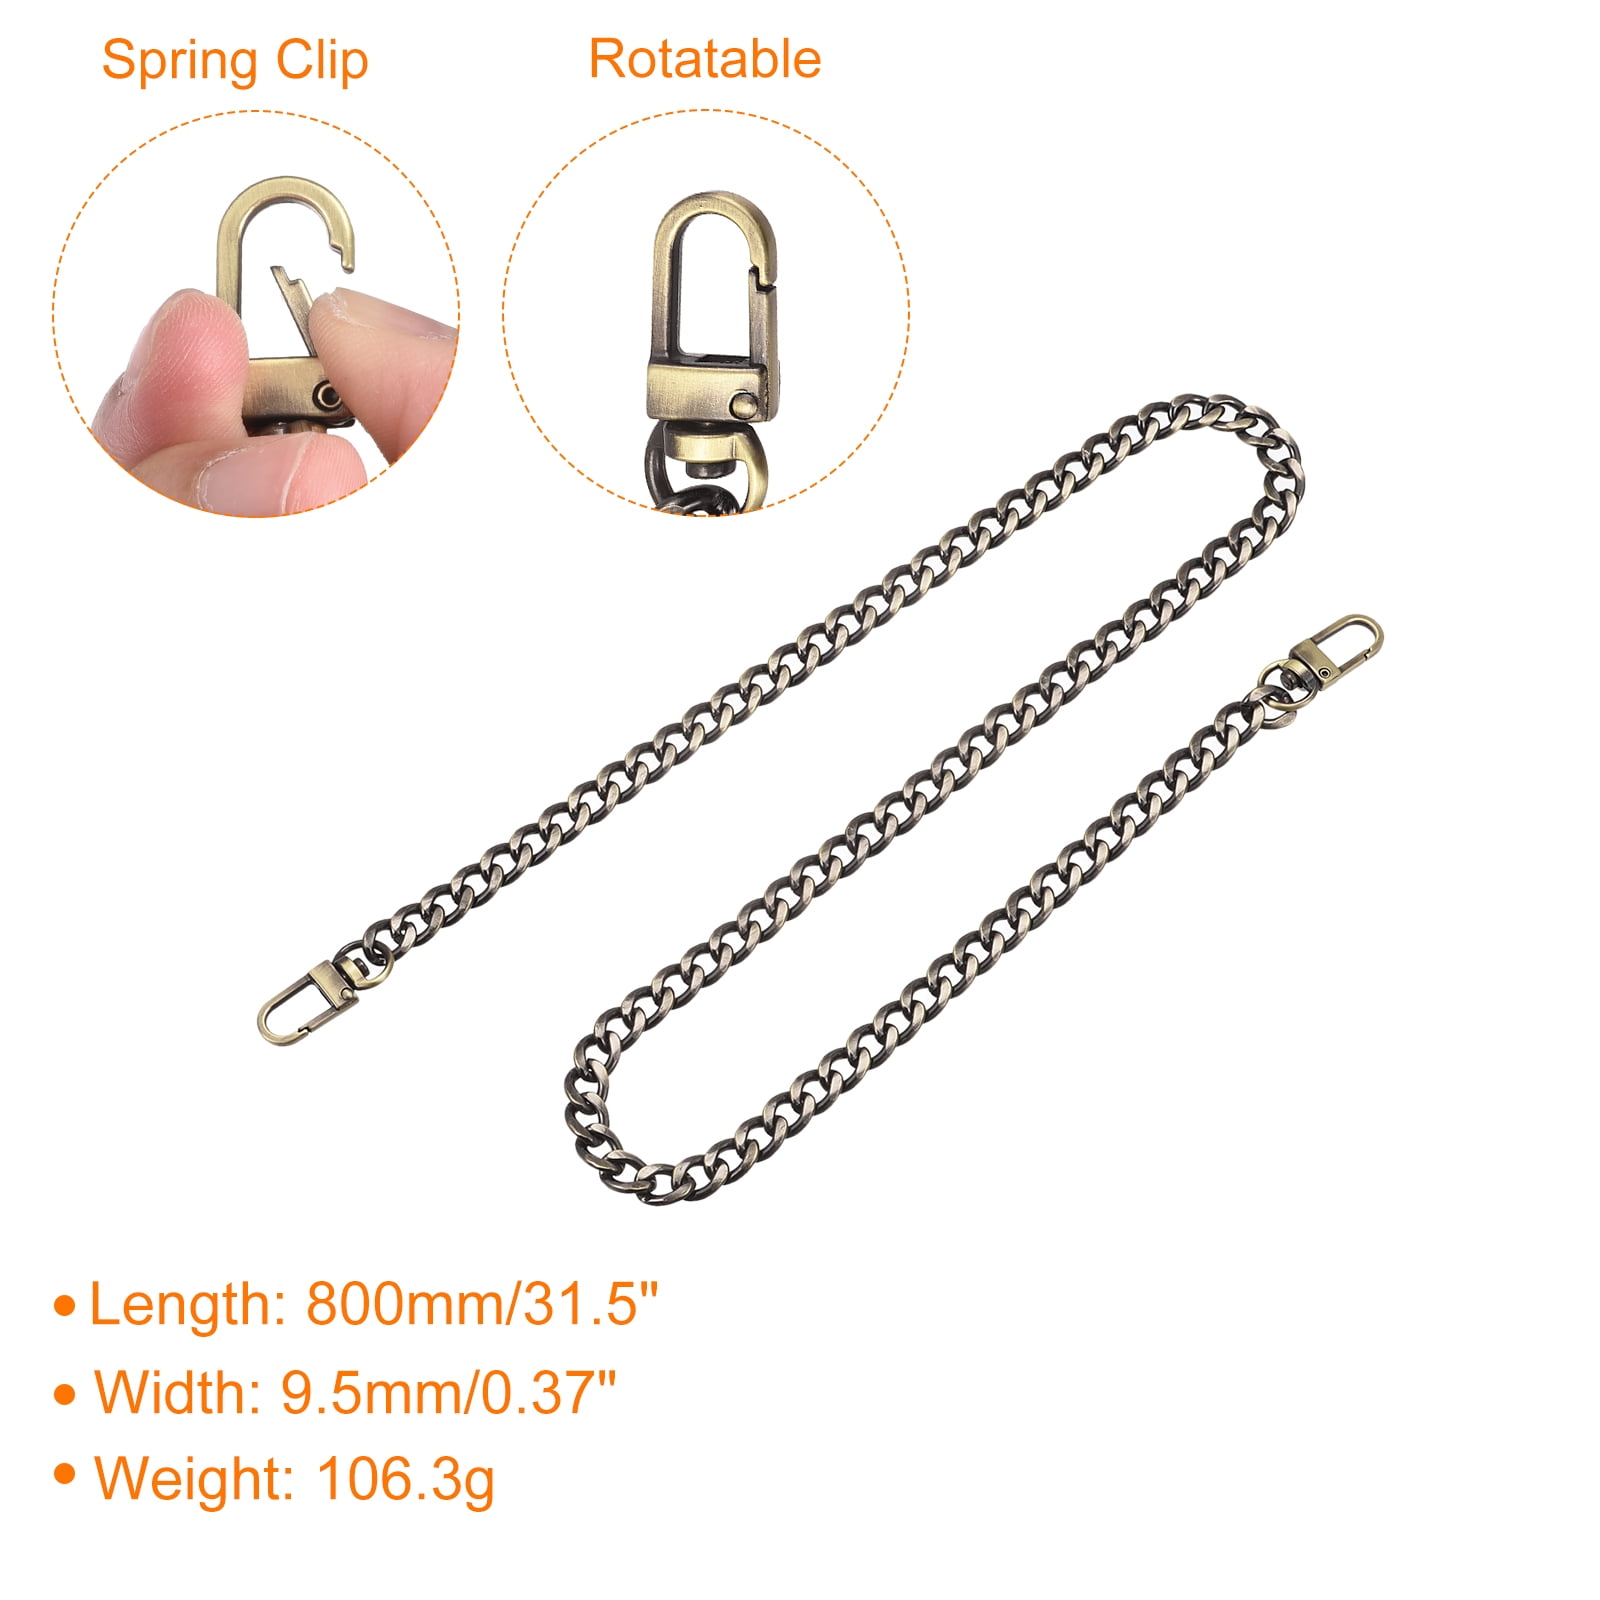 Anvin 47'' Flat Chain Strap DIY Iron Handbag Chains Replacement Purse  Straps Shoulder Crossbody Wallet Chain with Metal Buckles for Belt Bag  Clutch